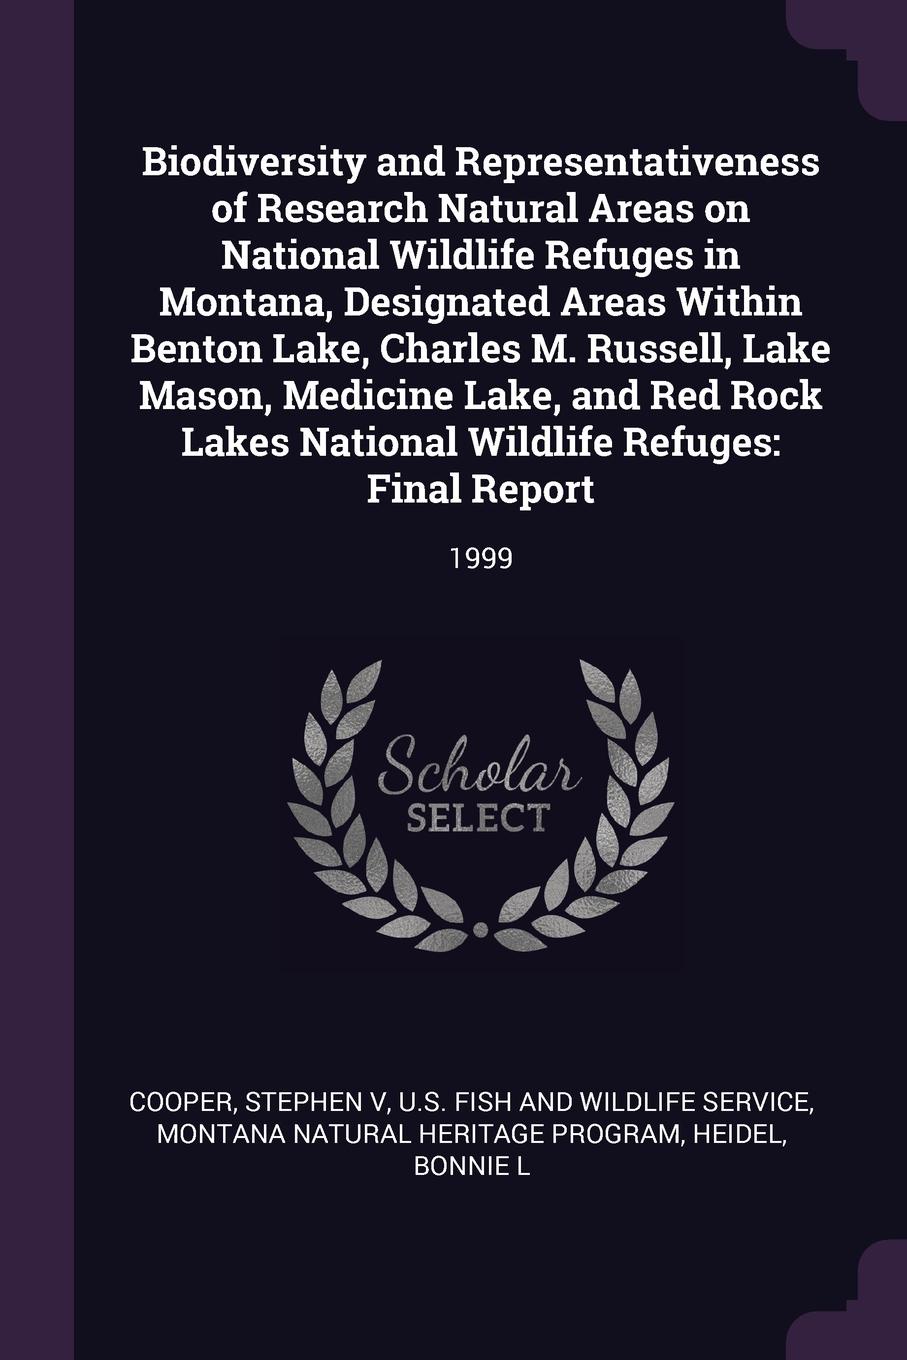 Biodiversity and Representativeness of Research Natural Areas on National Wildlife Refuges in Montana, Designated Areas Within Benton Lake, Charles M. Russell, Lake Mason, Medicine Lake, and Red Rock Lakes National Wildlife Refuges. Final Report: ...